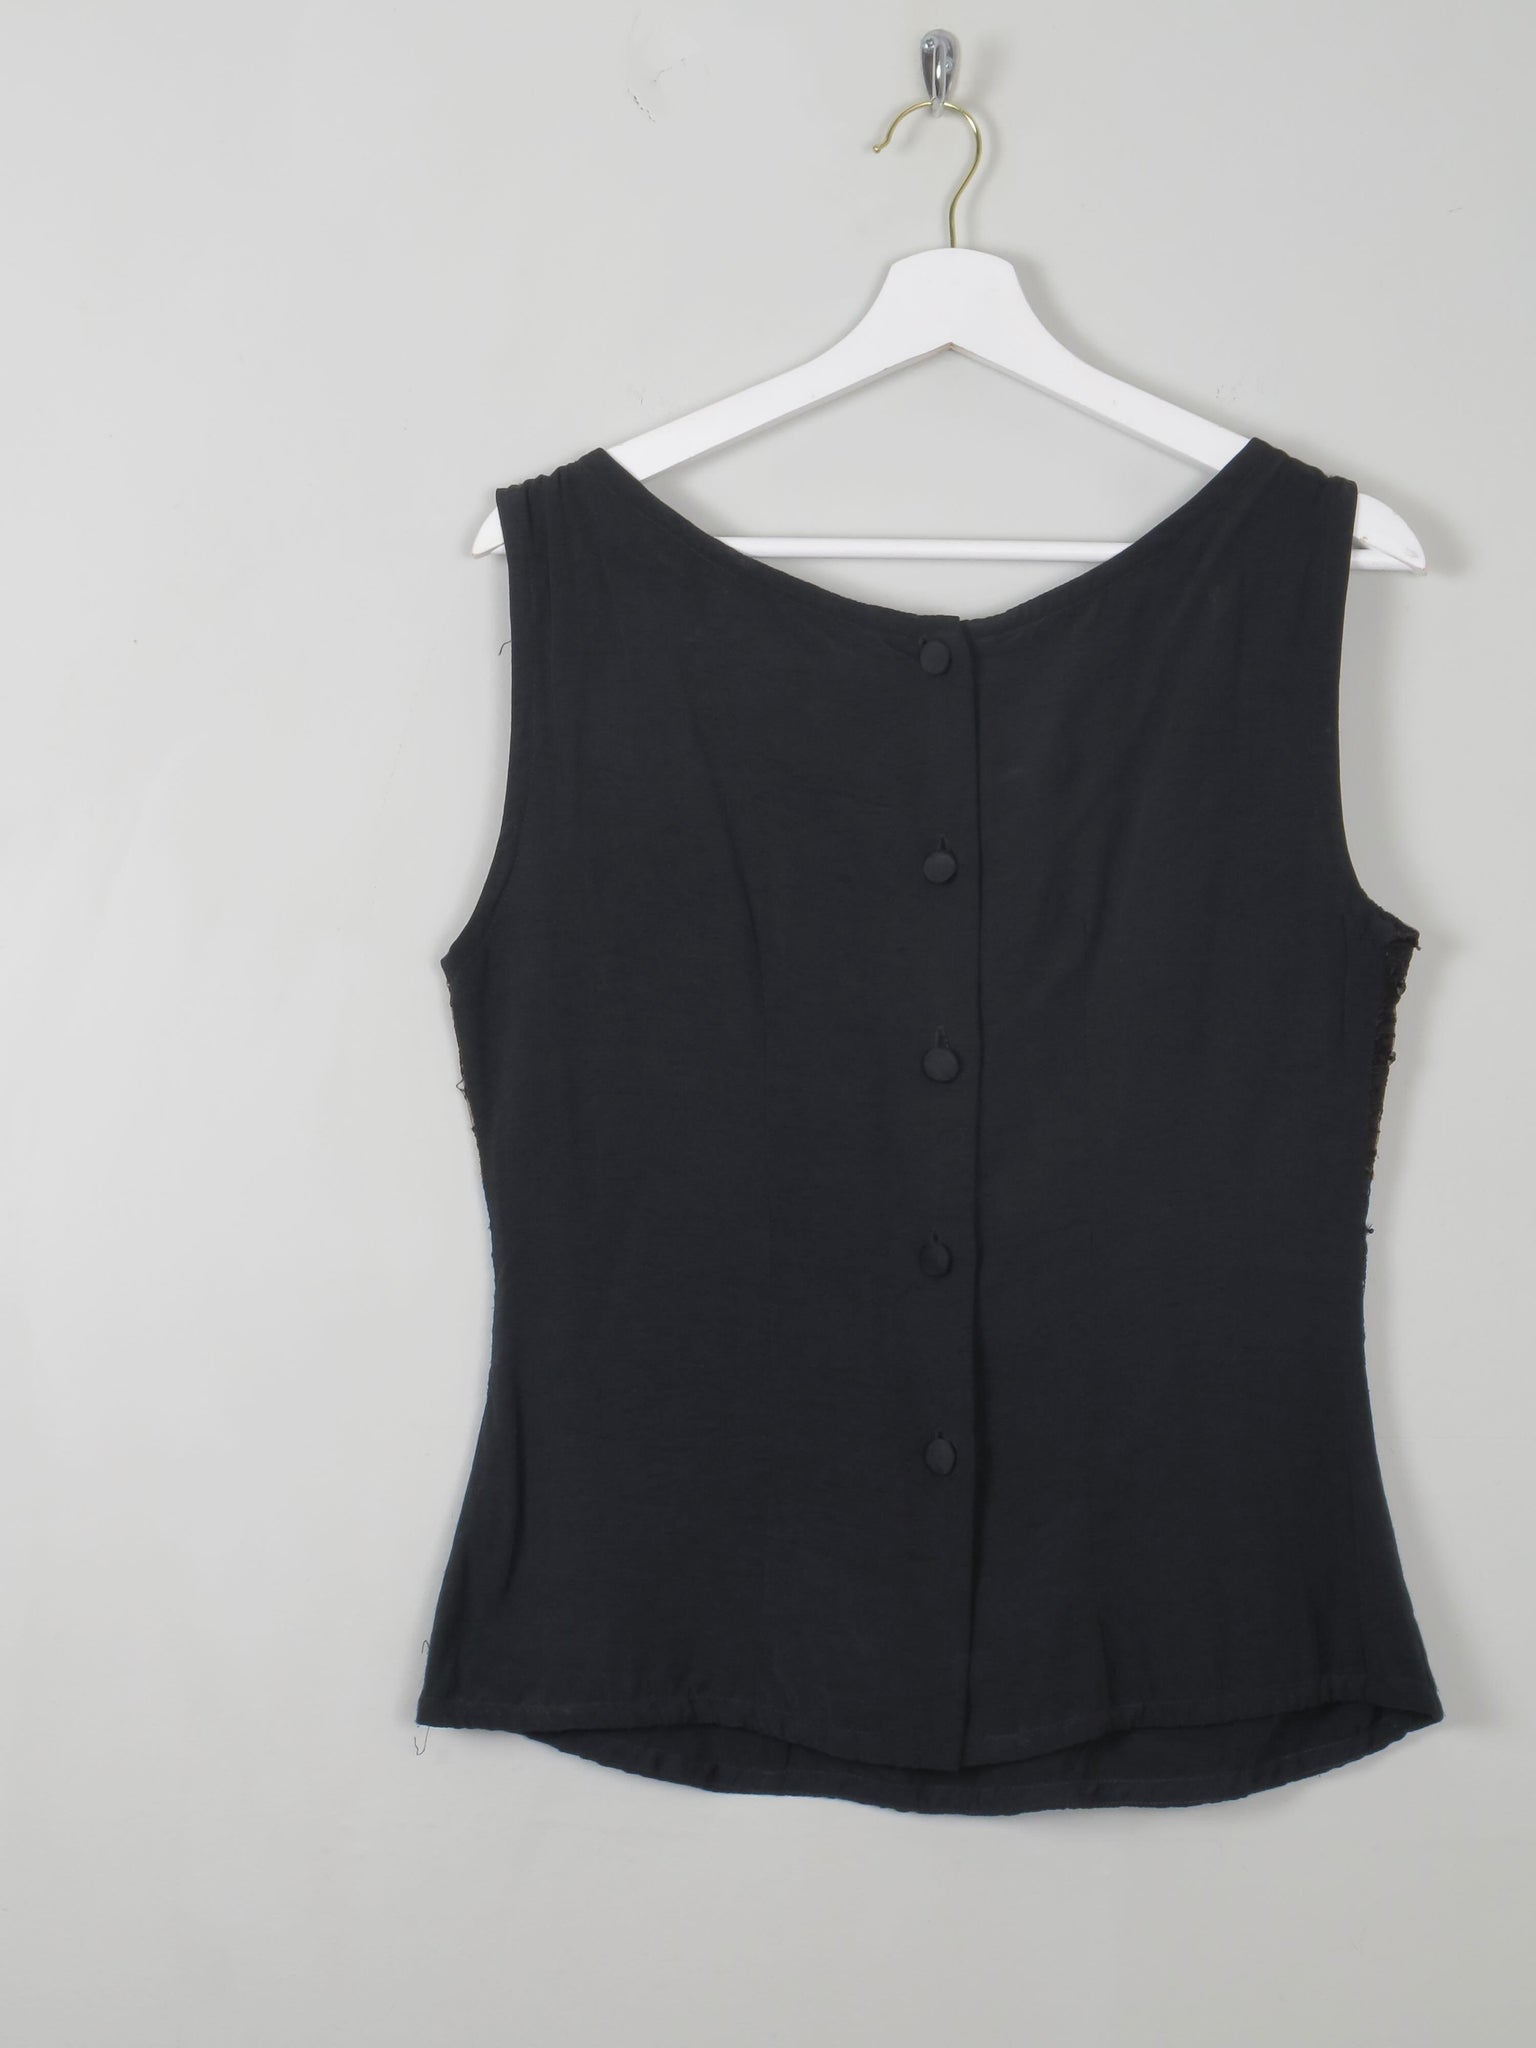 Women's Vintage Black Top With Lace Detail S - The Harlequin